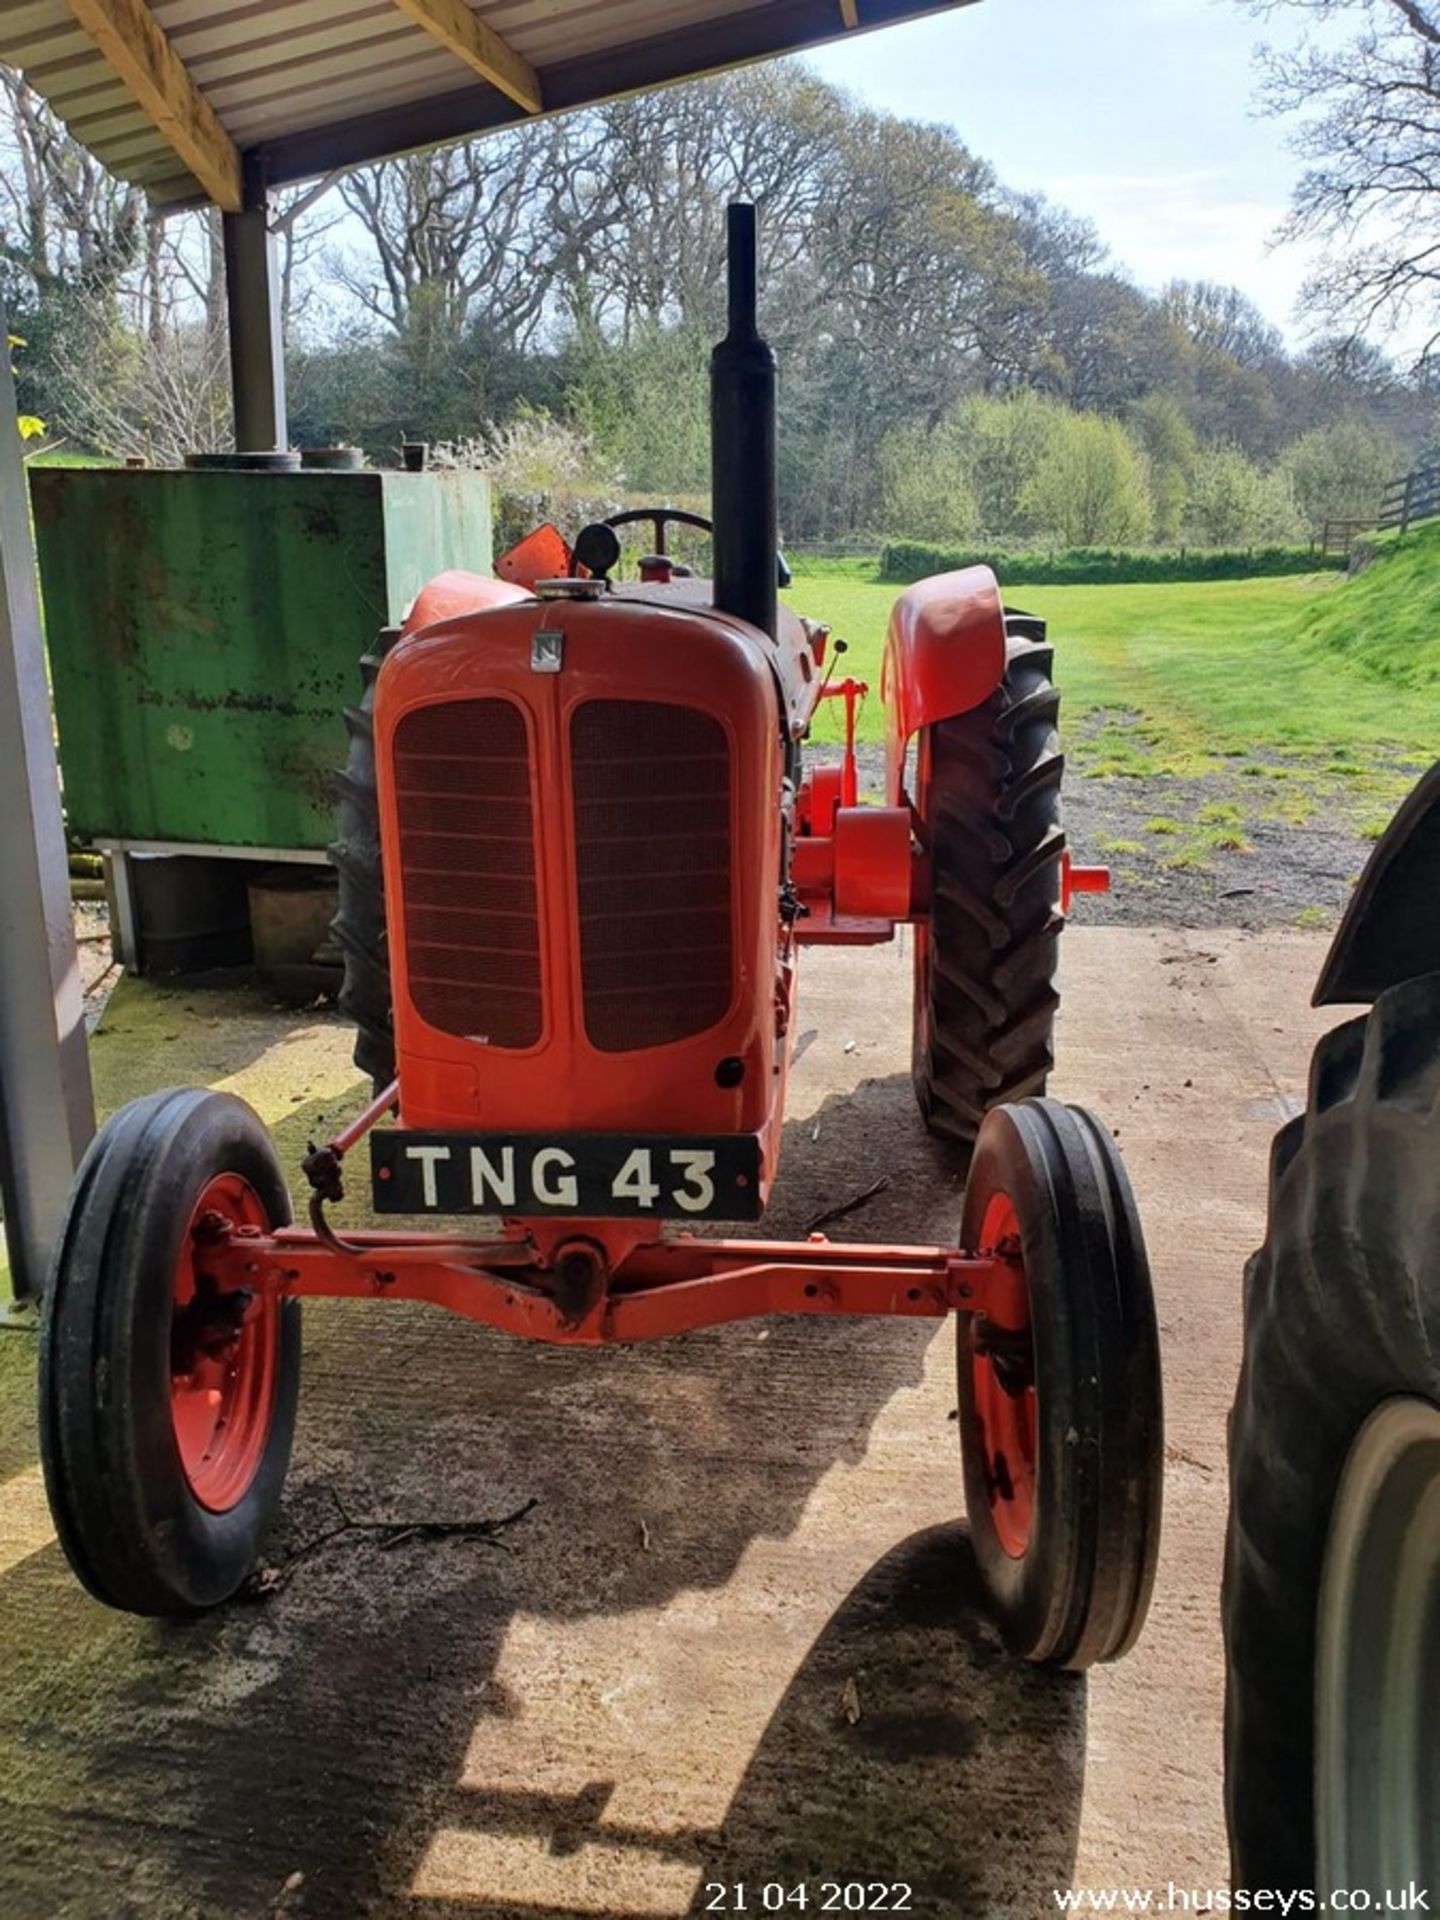 NUFFIELD VINTAGE TRACTOR - RECENTLY RESTORED BUT WON'T START - Image 2 of 4